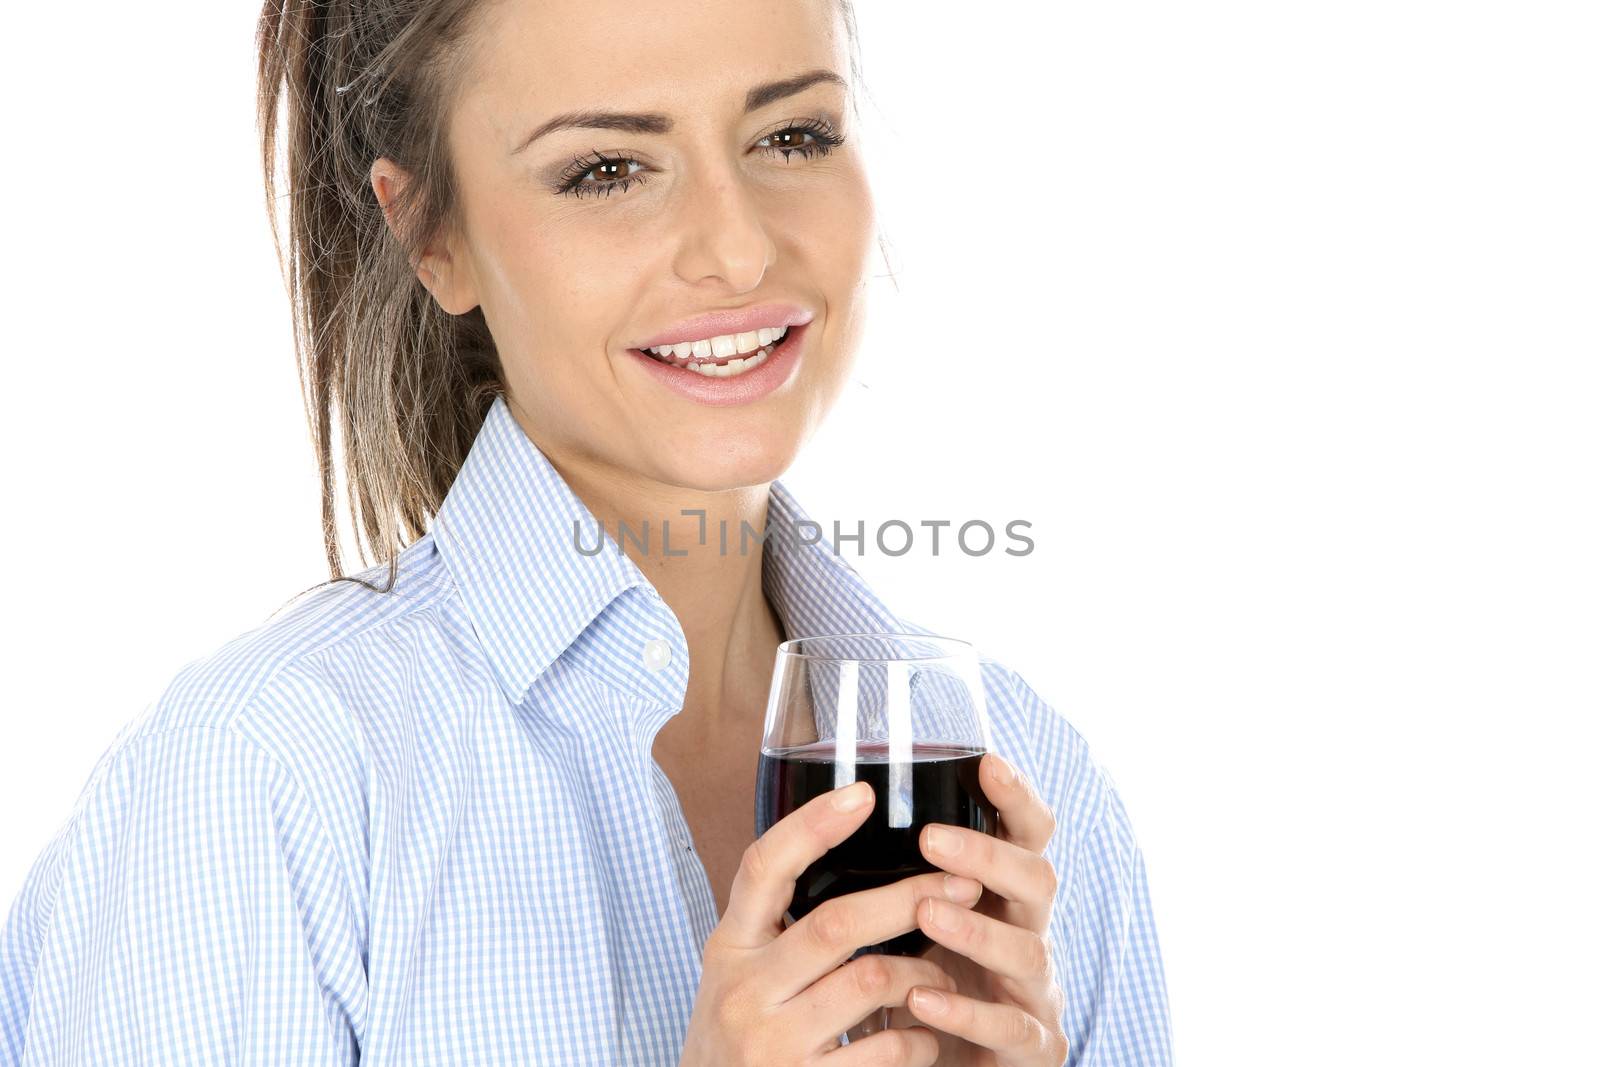 Model Released. Woman Drinking a Glass of Red Wine by Whiteboxmedia